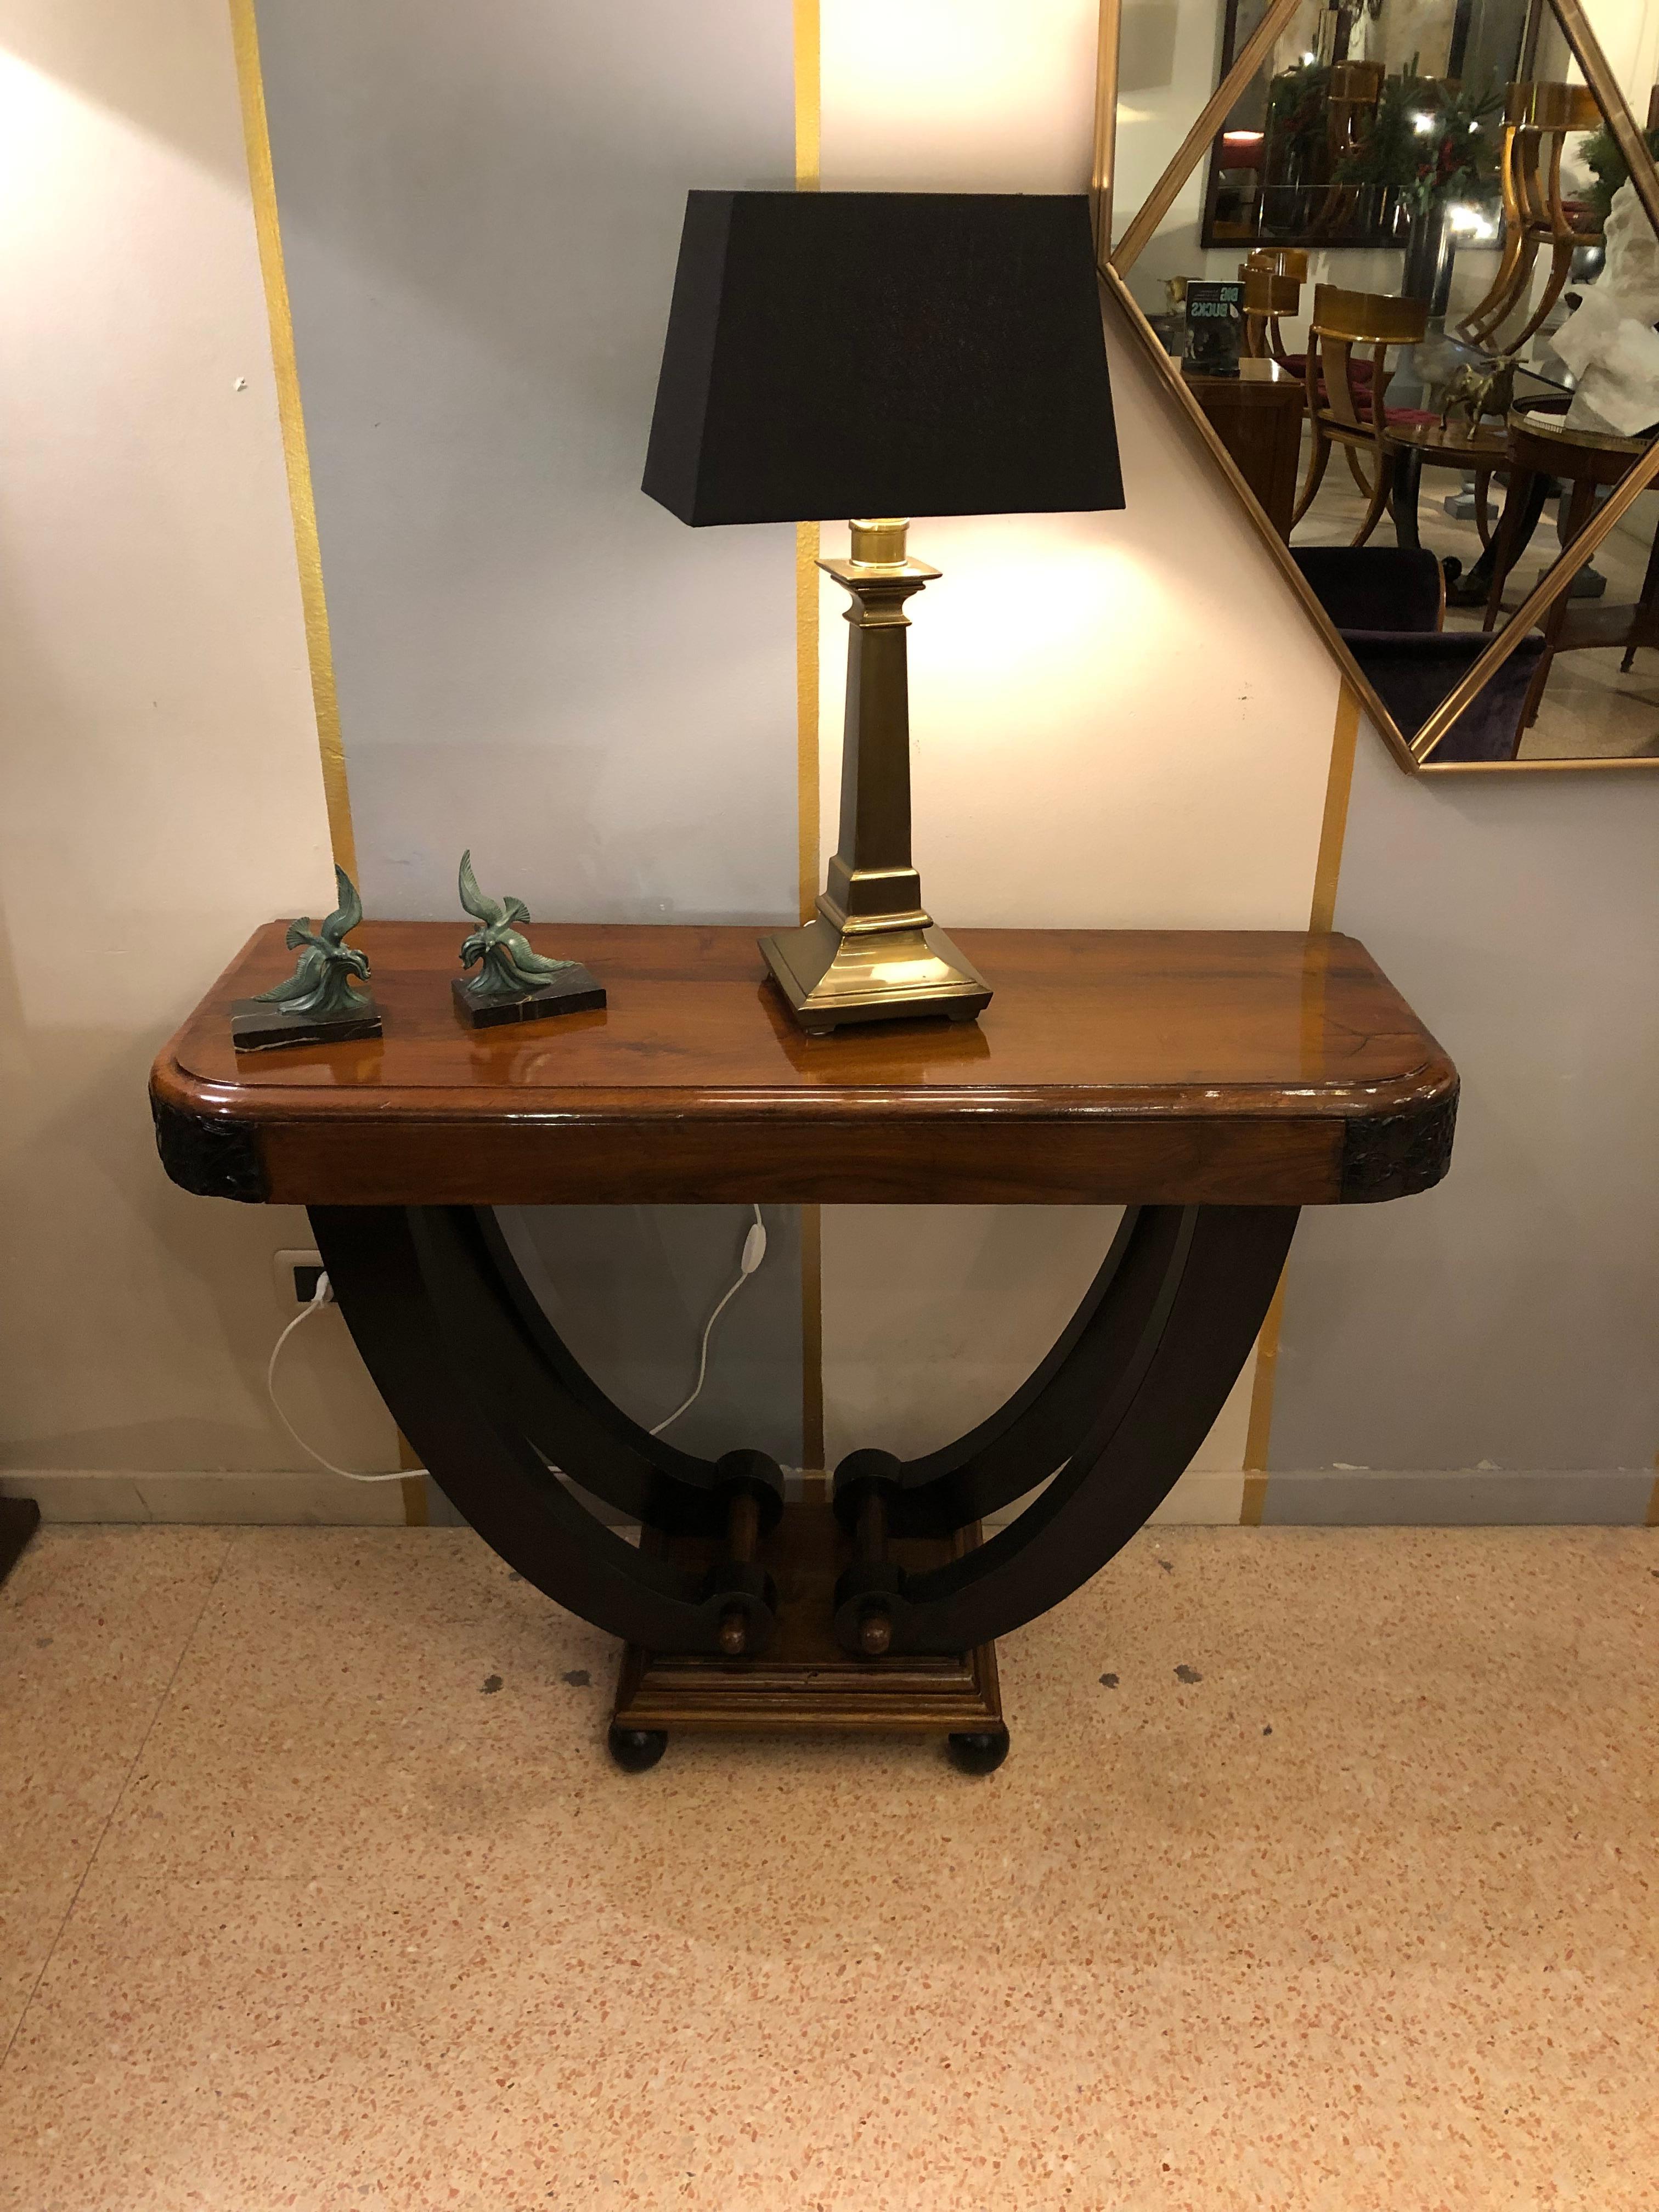 A table console with versatile size , W 110 cm, D 40 cm, H 71 cm which comes from Italy from late 1930s period. It is typical from Art Deco period and style with very geometric shape and line. It is in walnut wood with some black ebonized details